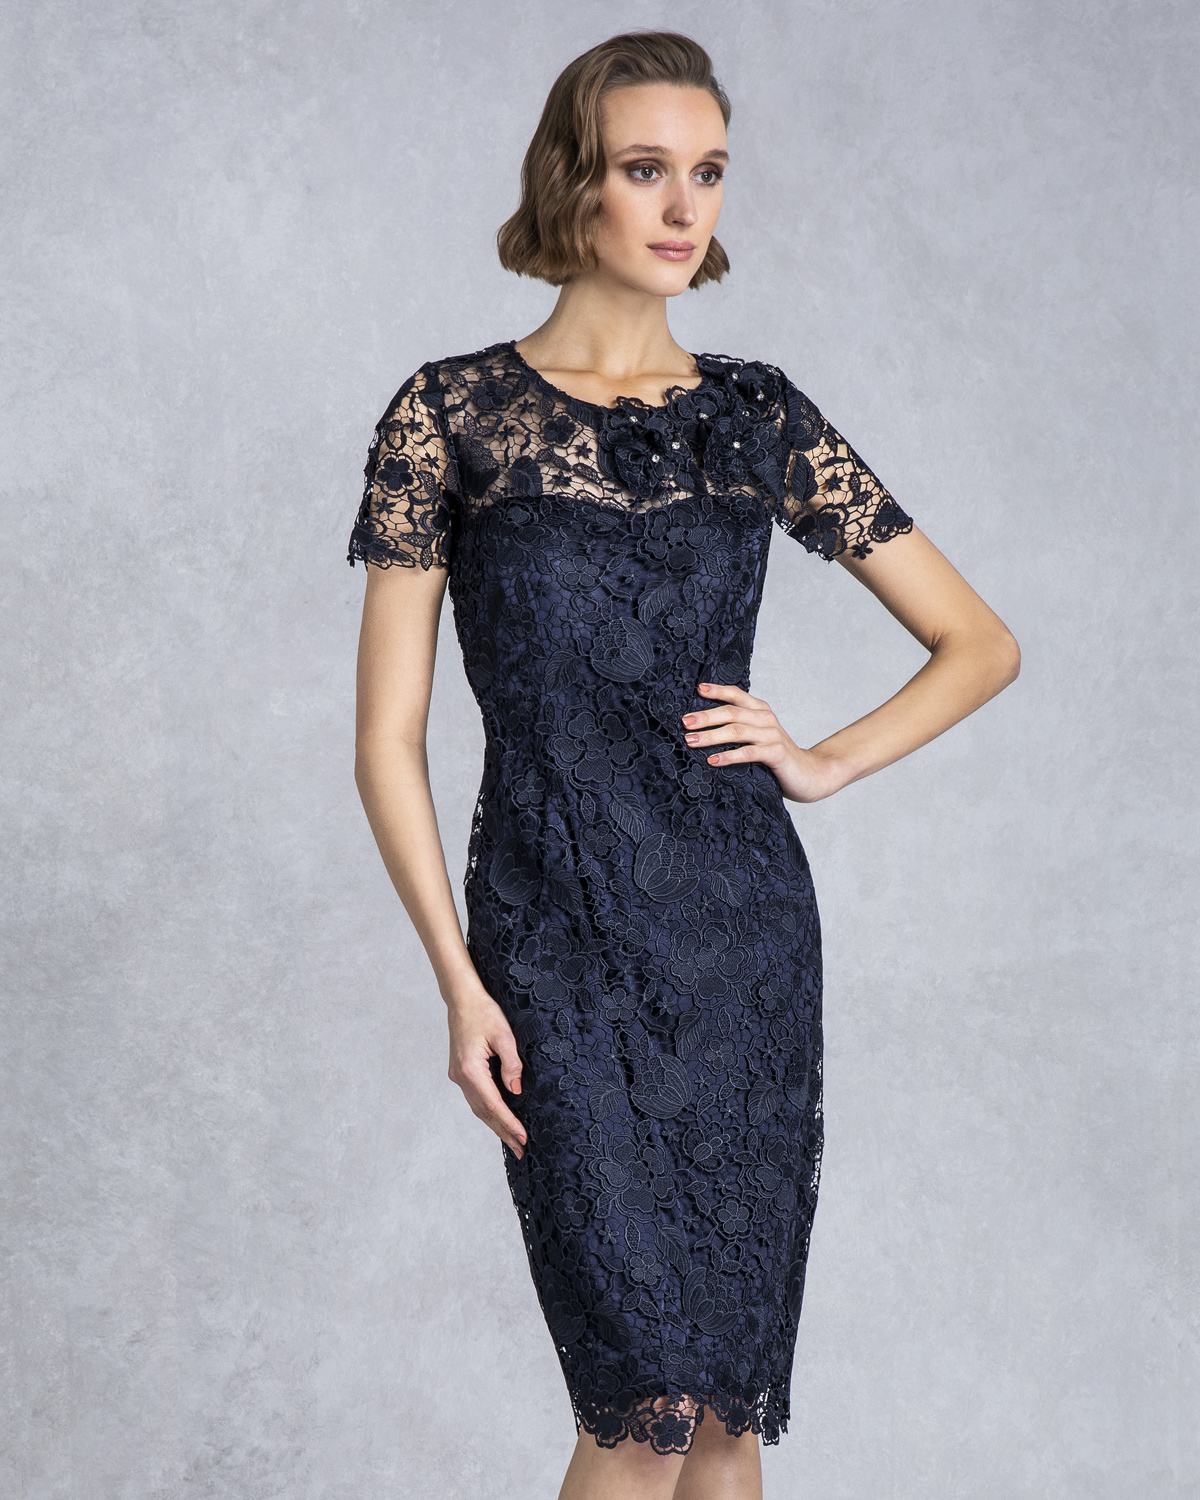 Classic Dresses / Mother of the bride short lace dress with sleeves